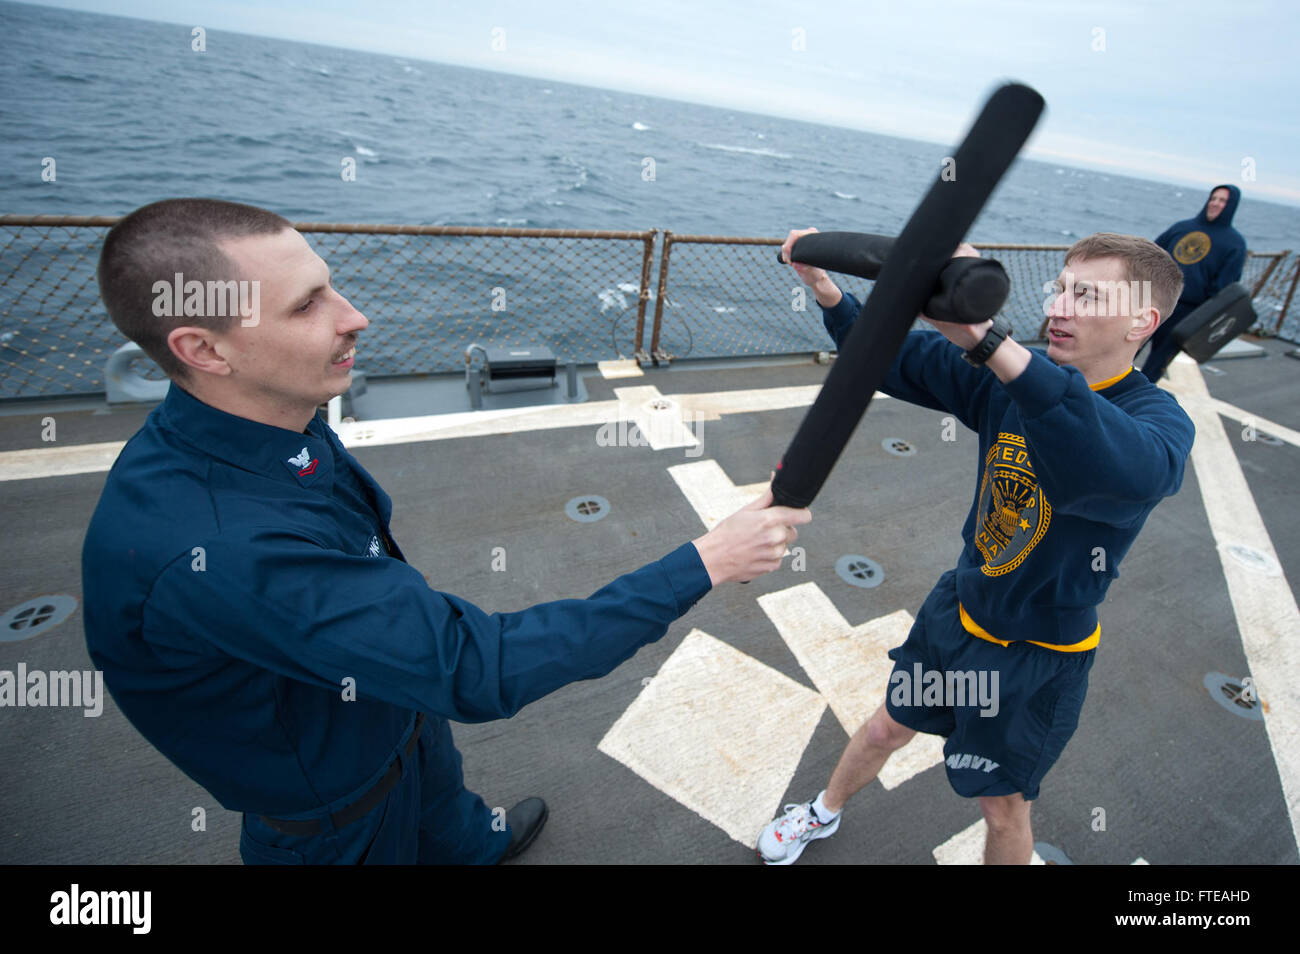 140228-N-WD757-399 MEDITERRANEAN SEA (FEB. 28, 2014) – Lt. j.g. Alexander Spalding defends himself against a simulated attacker after being sprayed with oleoresin capsicum (OC) during an OC spray qualification course aboard the guided-missile destroyer USS Arleigh Burke (DDG 51). Arleigh Burke is on a scheduled deployment in support of maritime security operations and theater security cooperation efforts in the U.S. 5th and 6th Fleet area of responsibility. (U.S. Navy photo by Mass Communication Specialist 2nd Class Carlos M. Vazquez II/Released)  Join the conversation on Twitter ( https://twi Stock Photo